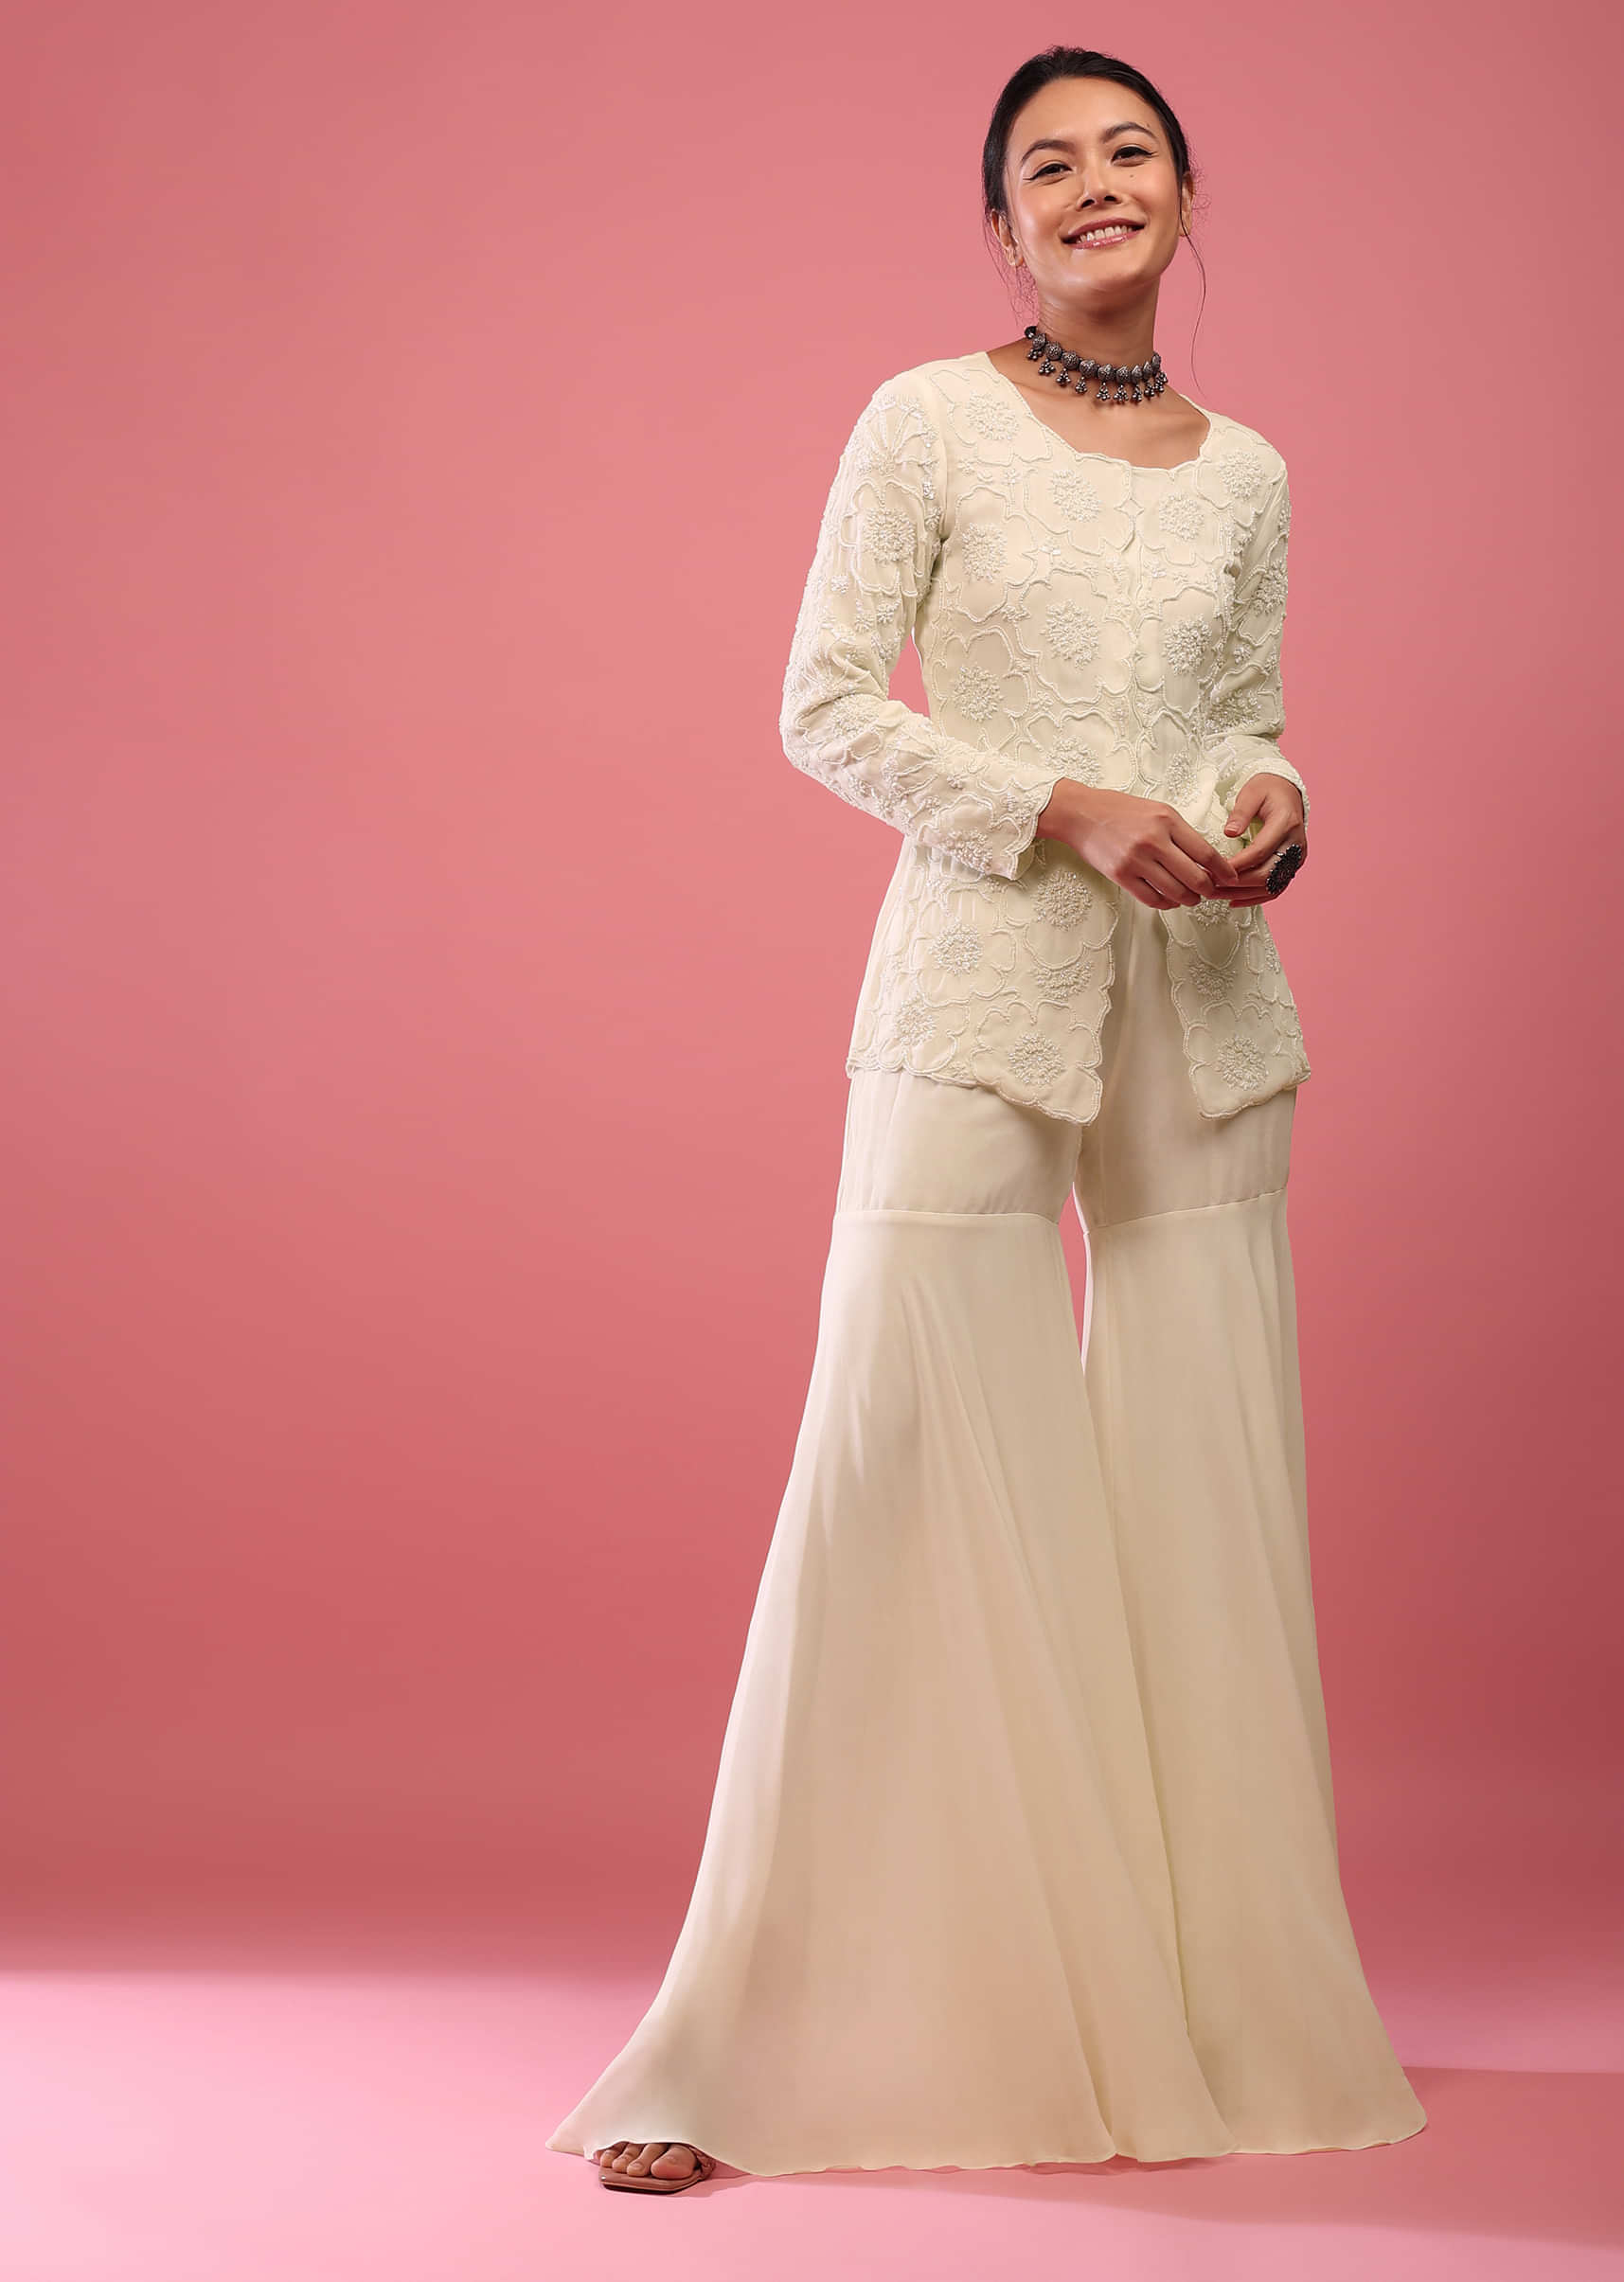 Off-White Sharara Suit In Georgette With Fully Embroidered Top & Flowy Pants